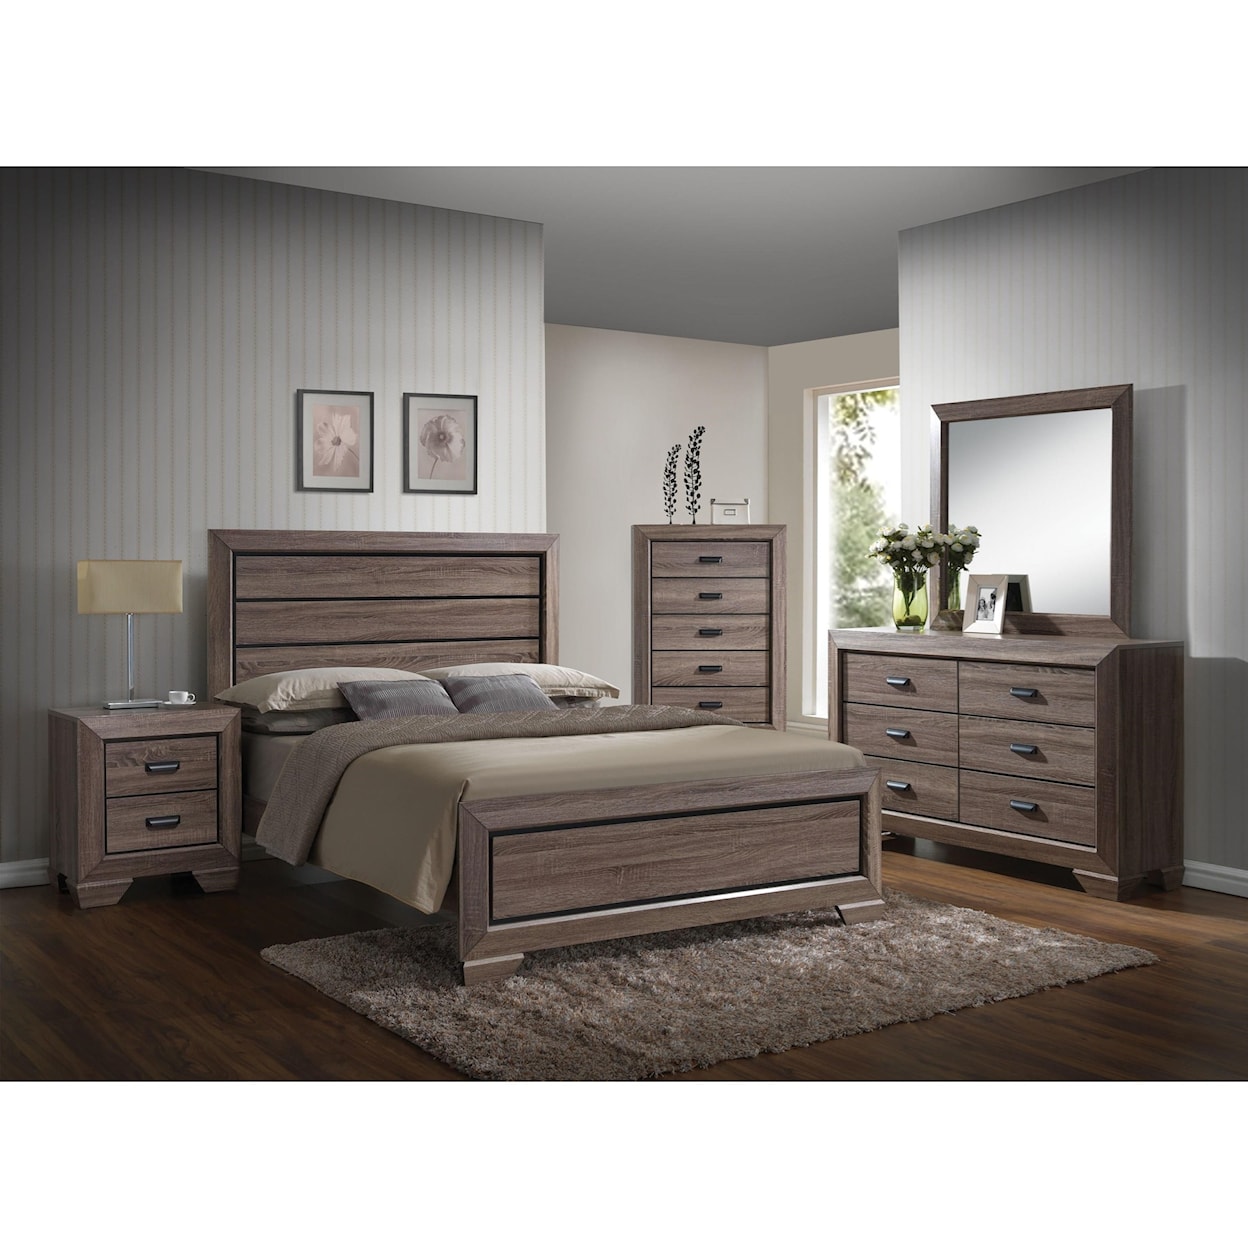 Acme Furniture Lyndon Queen Bed